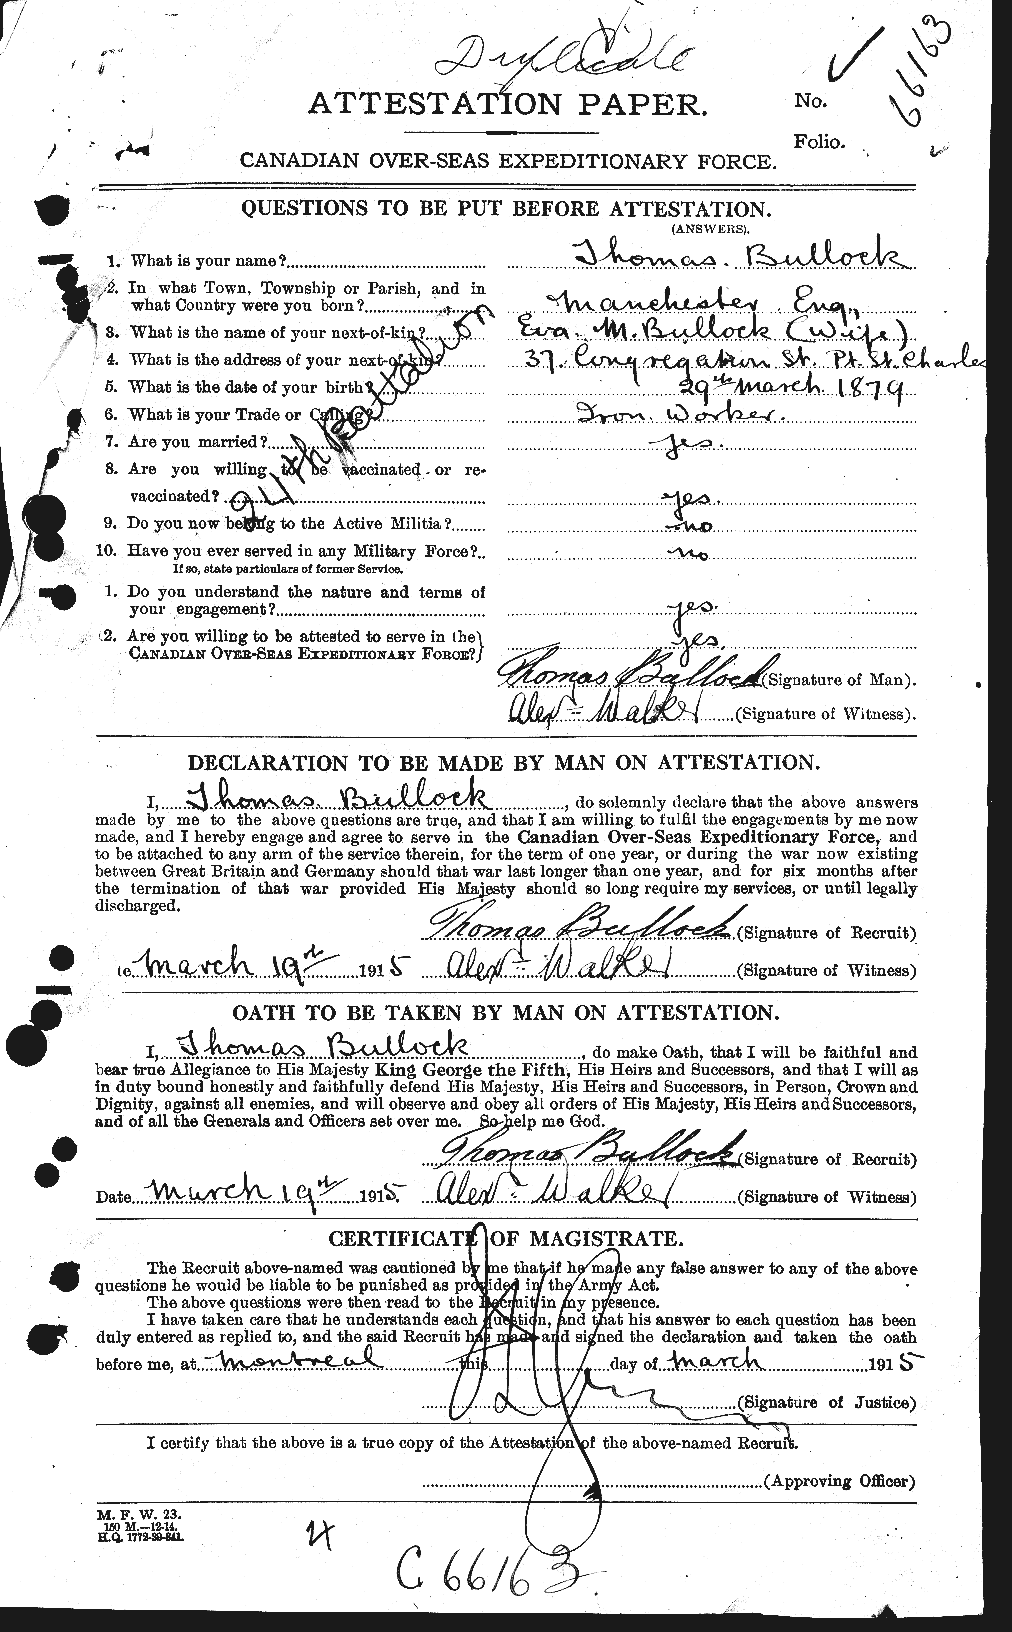 Personnel Records of the First World War - CEF 269745a